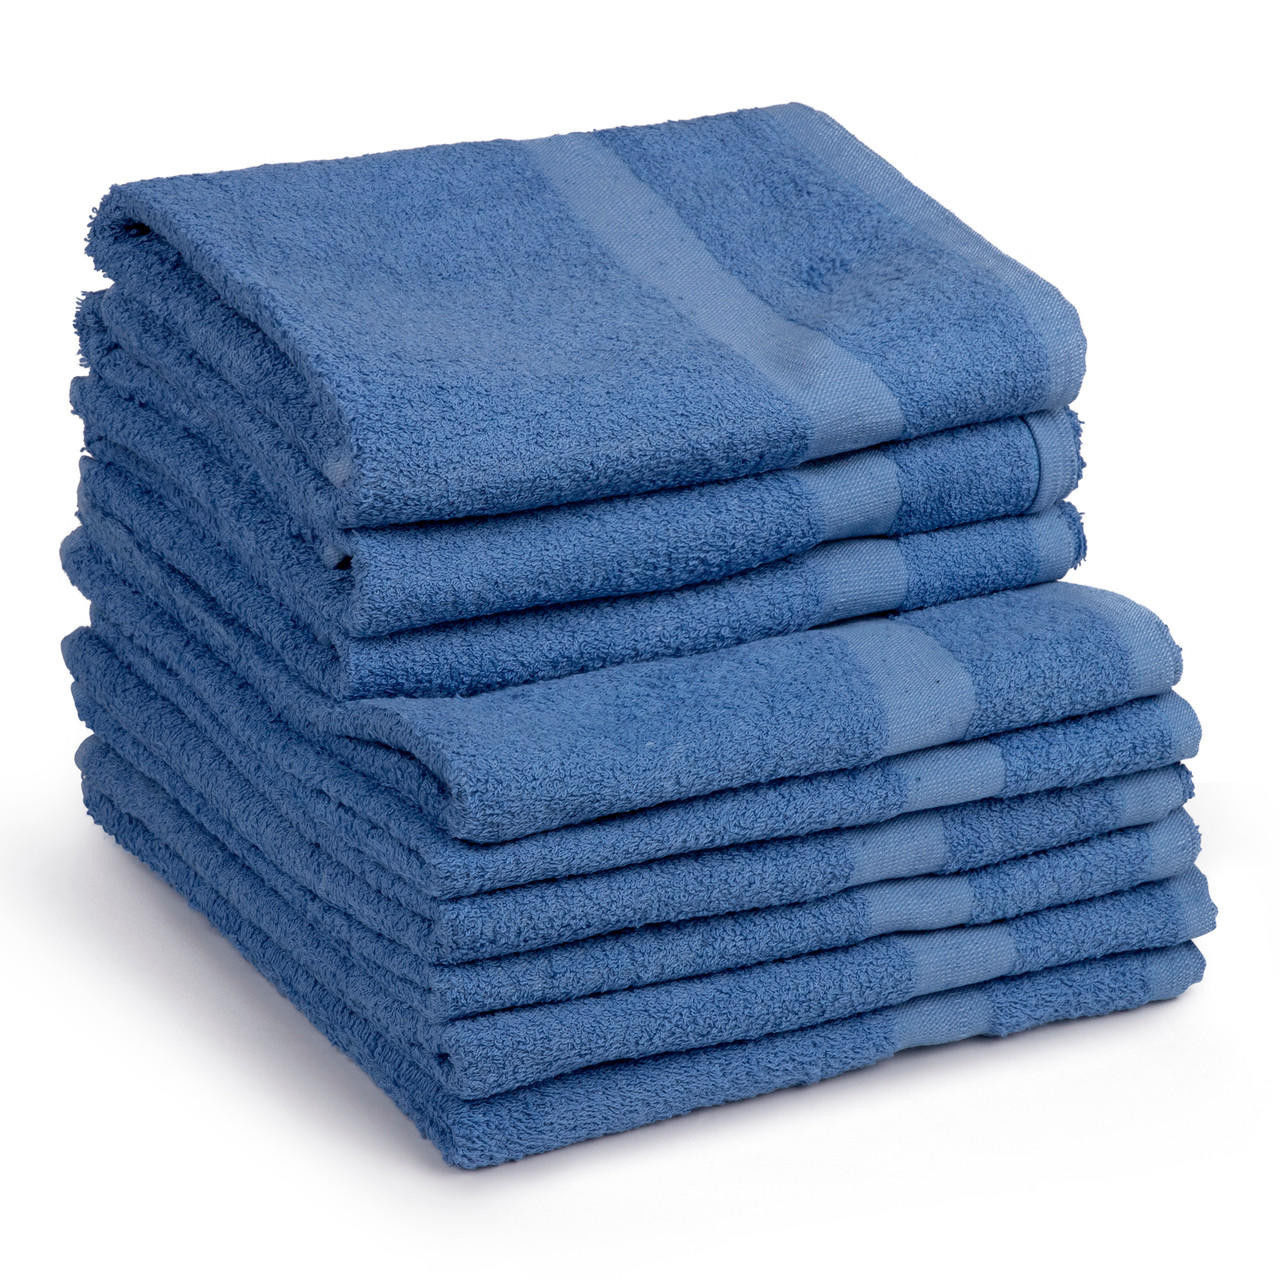 For what purposes are the blue washcloths in bulk from the Blue Towel Collection, 16s ideal?